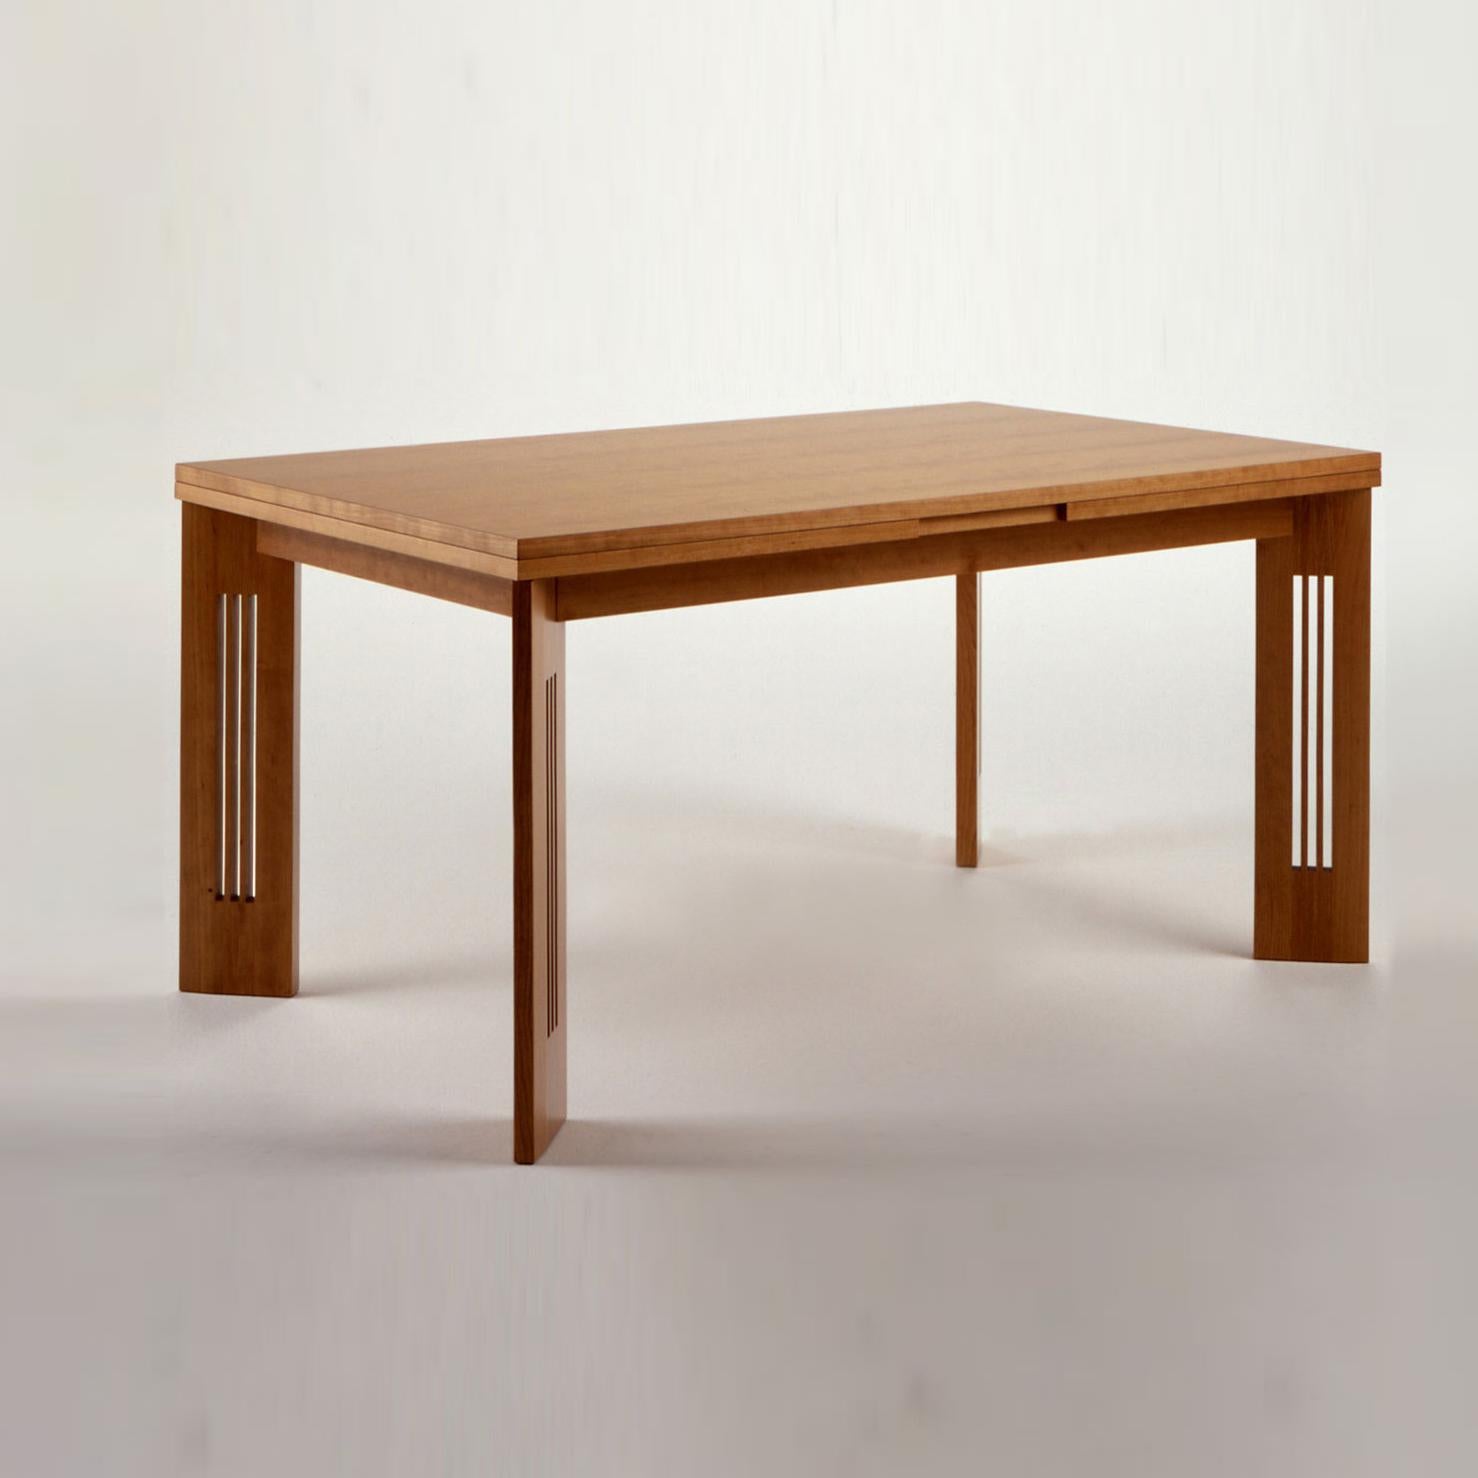 Extendable table designed by Charles Rennie Mackintosh in 1905. Relaunched in 1996.
Manufactured by Cassina in Italy.

An extendable table, exemplifying the perfect balance between Classic and contemporary, designed by Charles Rennie Mackintosh in